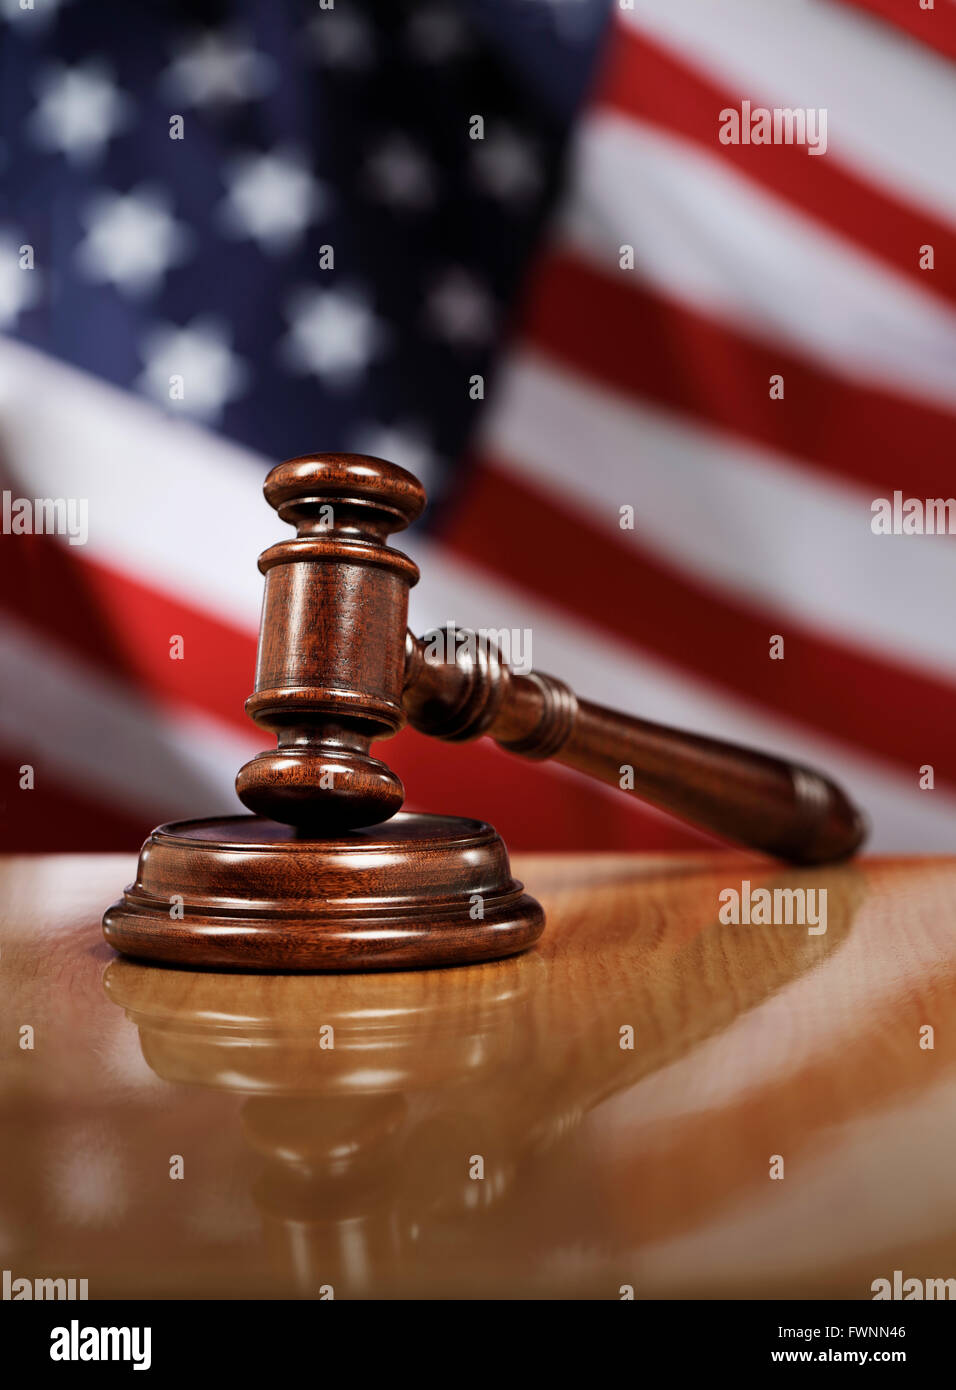 Wooden gavel on glossy table, The flag of USA in the background. Stock Photo